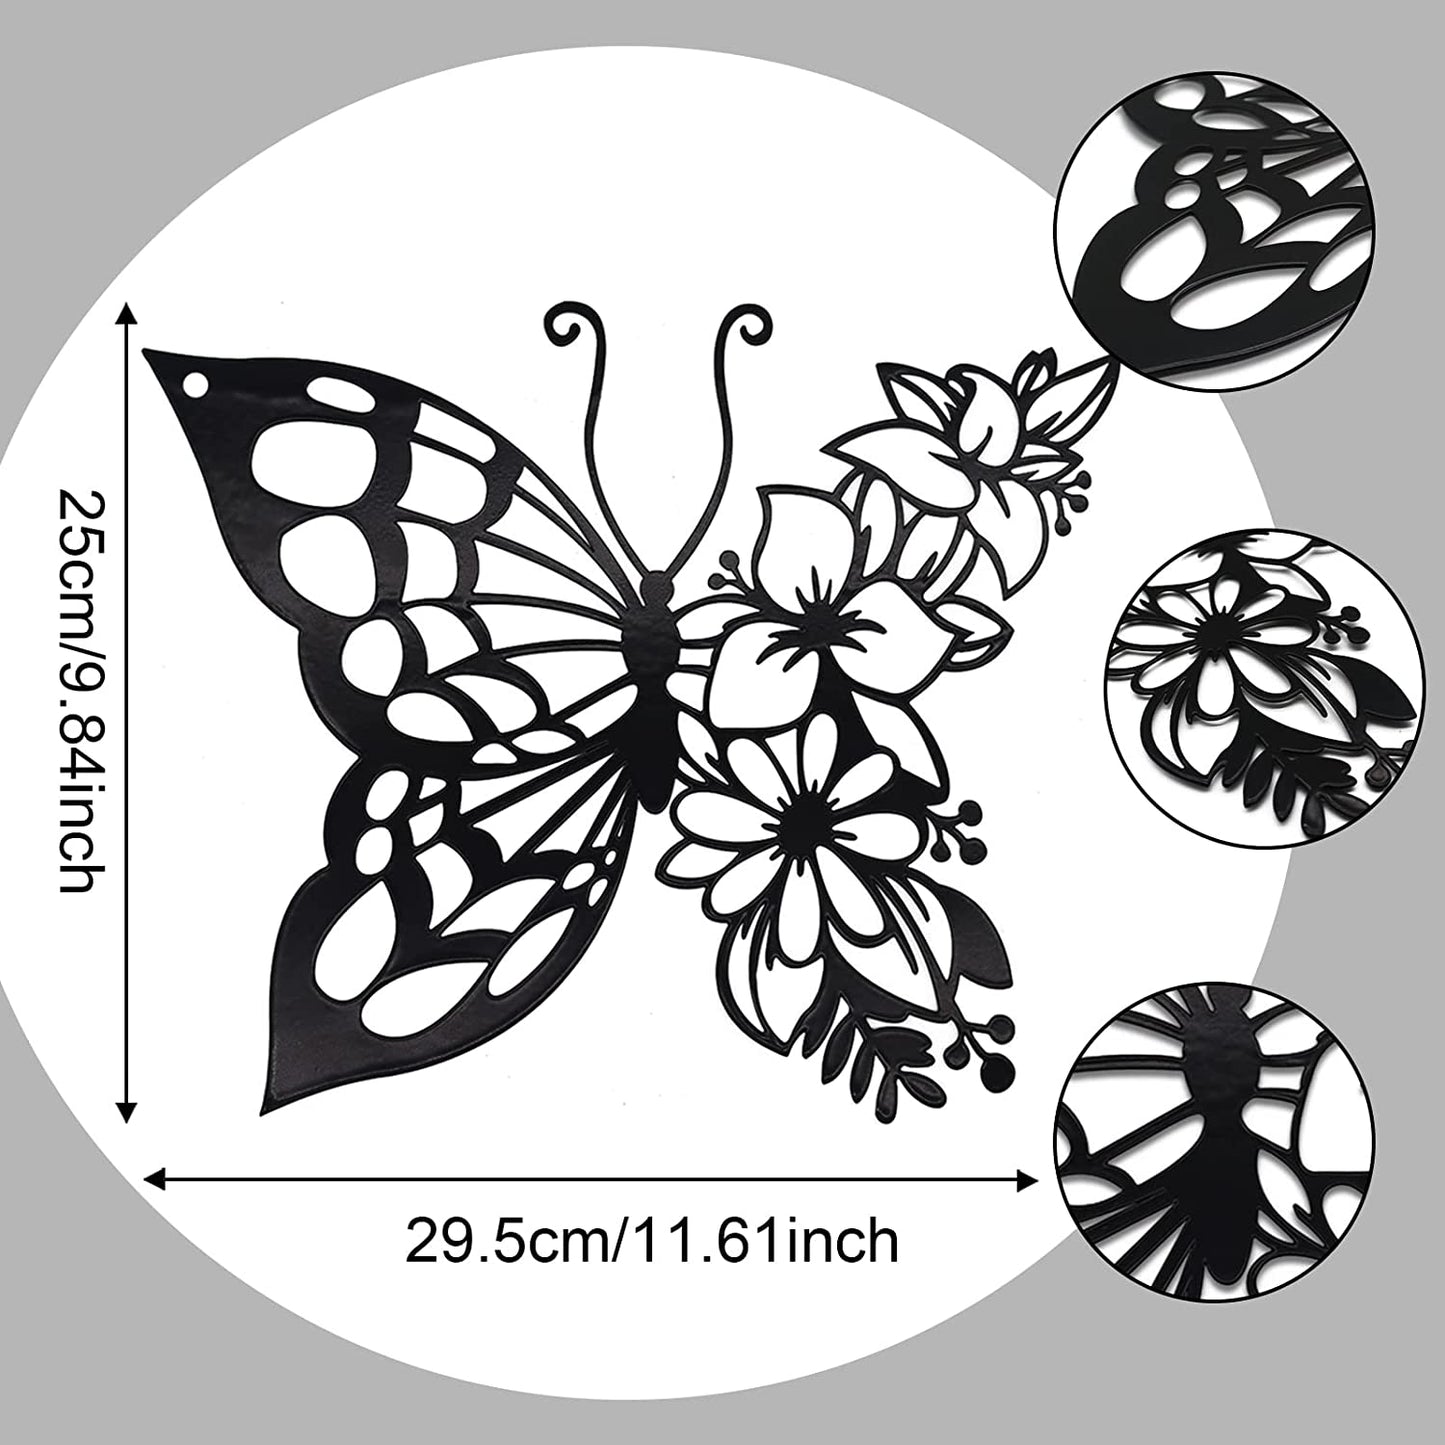 Butterfly Wall Art Hanging Appearance Metal,Black(Large)